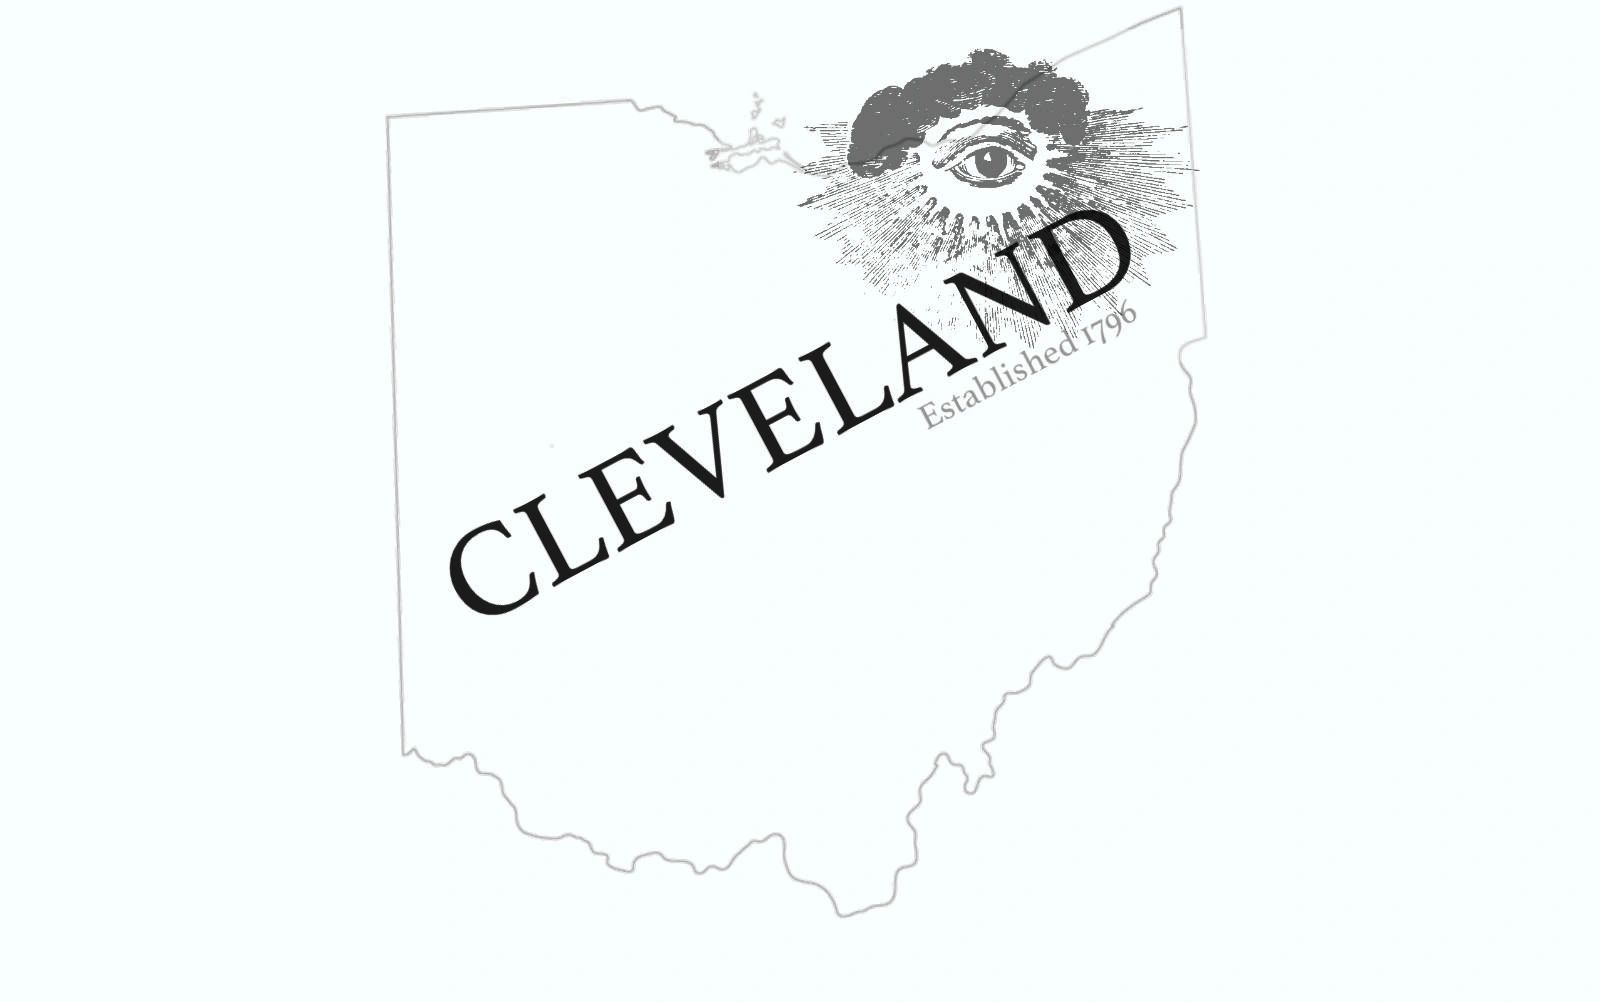 Cleveland designby Nick Hardy - All Seeing Eye is located approximately where Cleveland is located